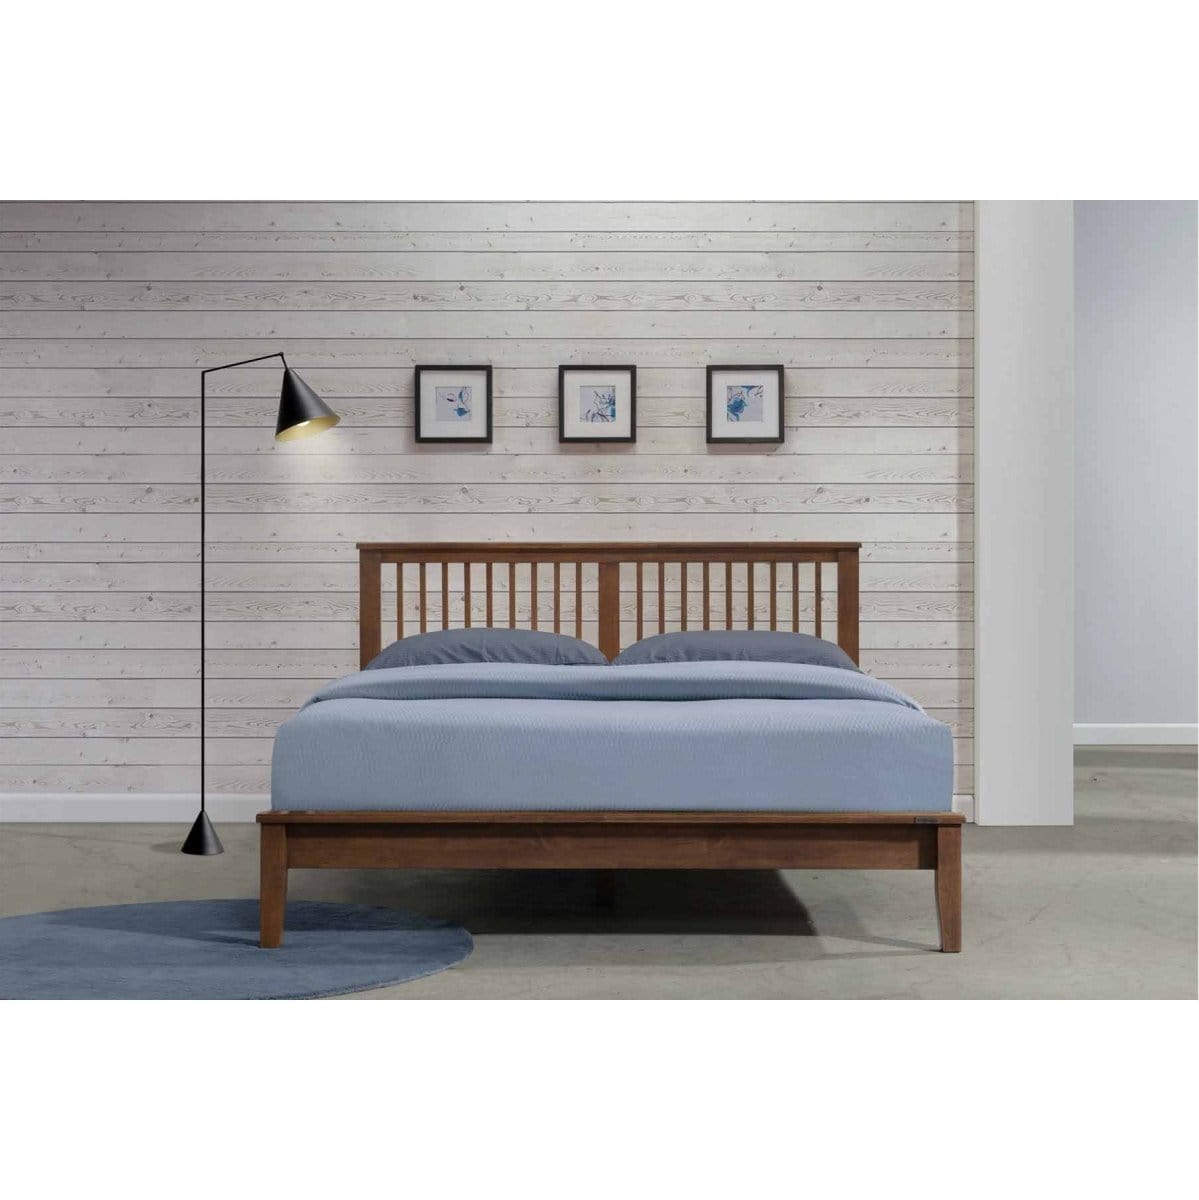 #1 Mission XII Solid Wood Queen Bed ( BED-ITG-929B-Q ) picket and rail